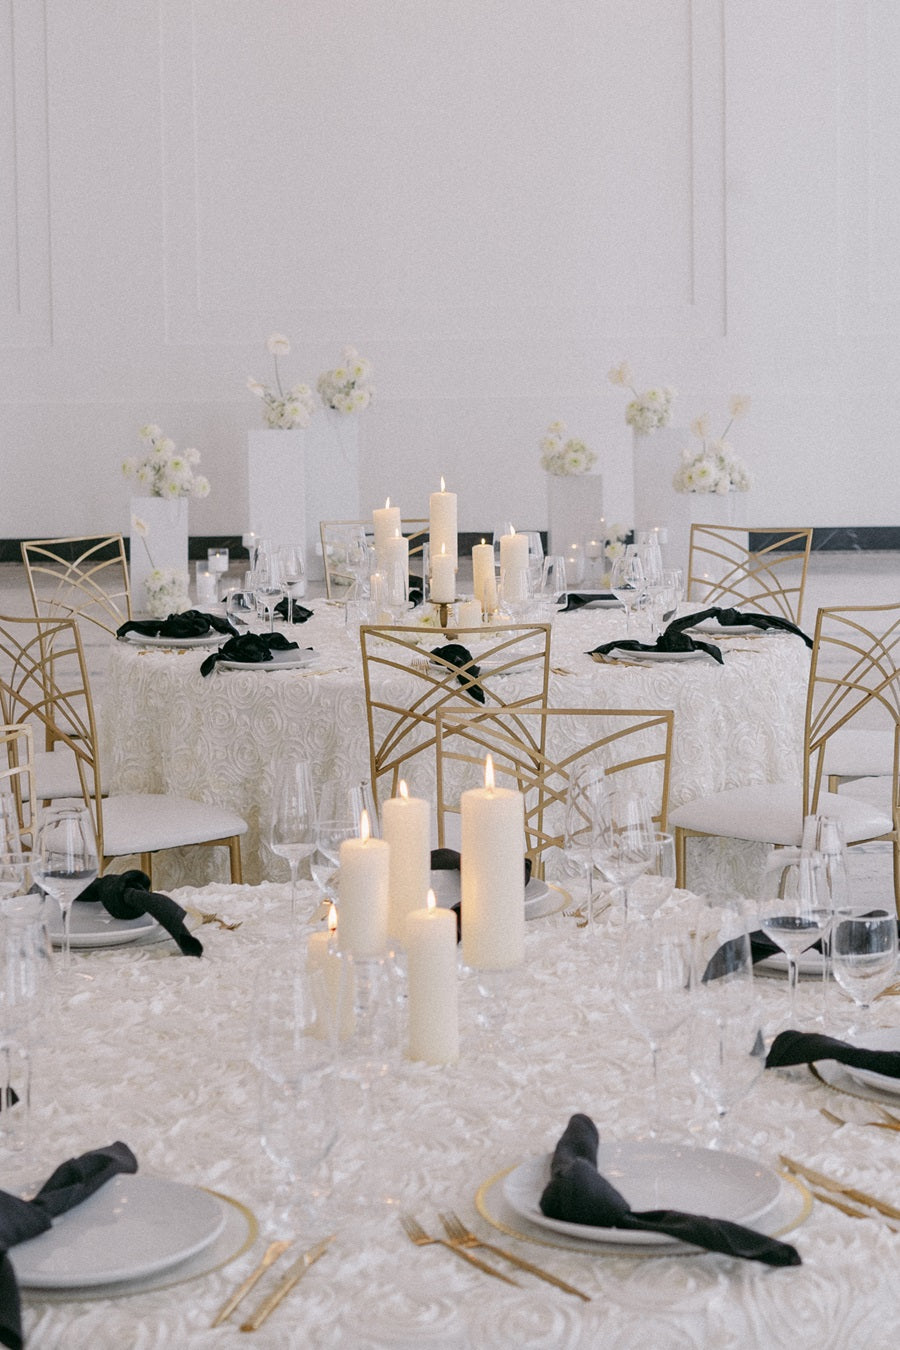 The reception tables are set in a black and white theme. The table cloths themselves are white with a textured rose pattern. The centerpieces are sets of lit pillar candles and the floral pedestals can be seen in the background.